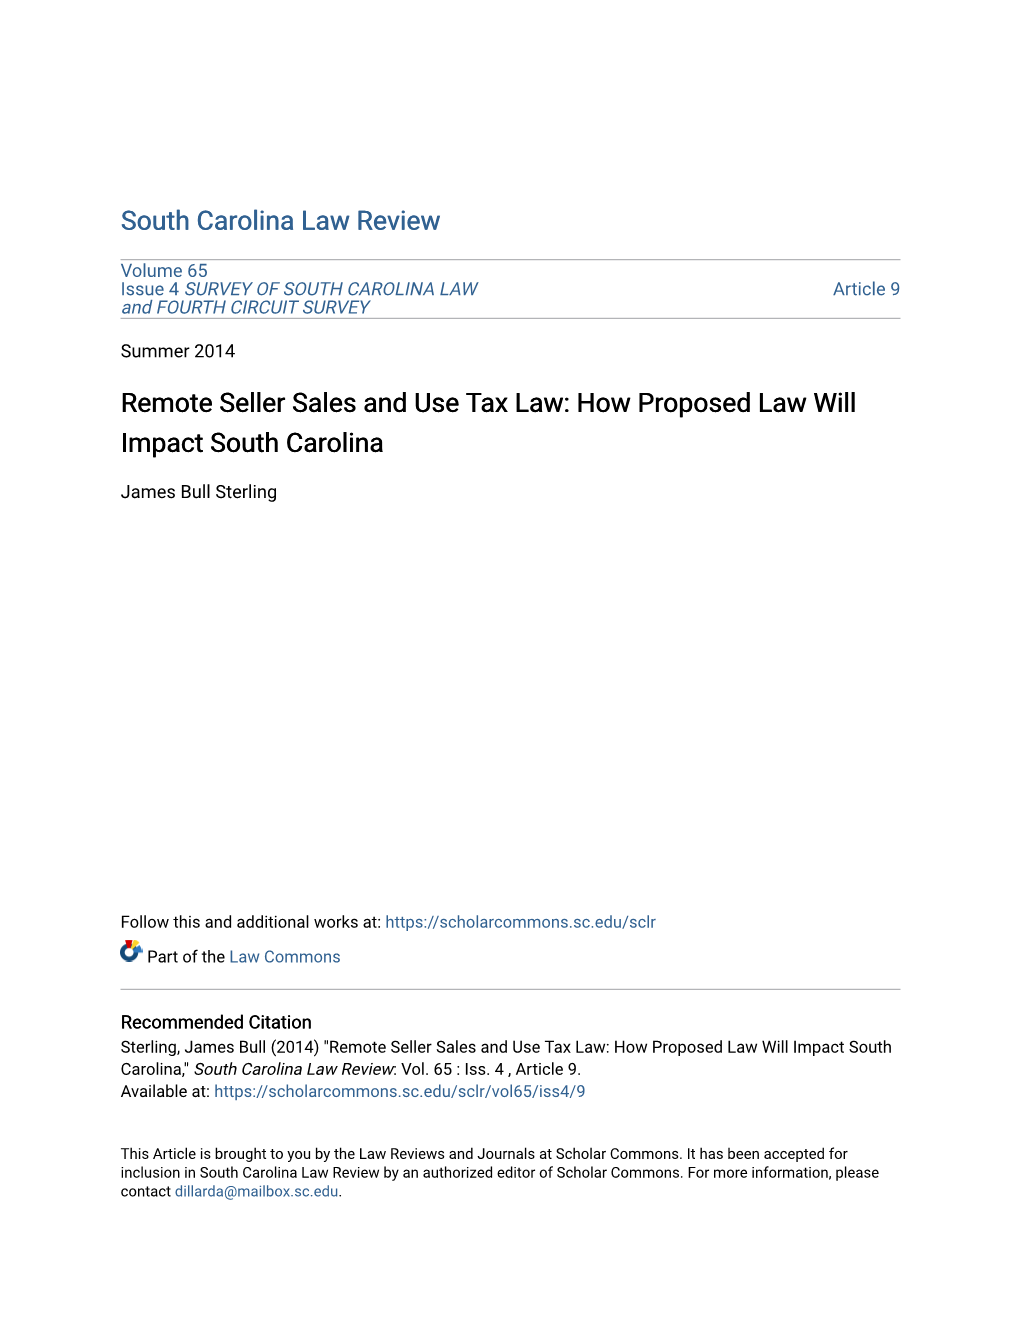 Remote Seller Sales and Use Tax Law: How Proposed Law Will Impact South Carolina